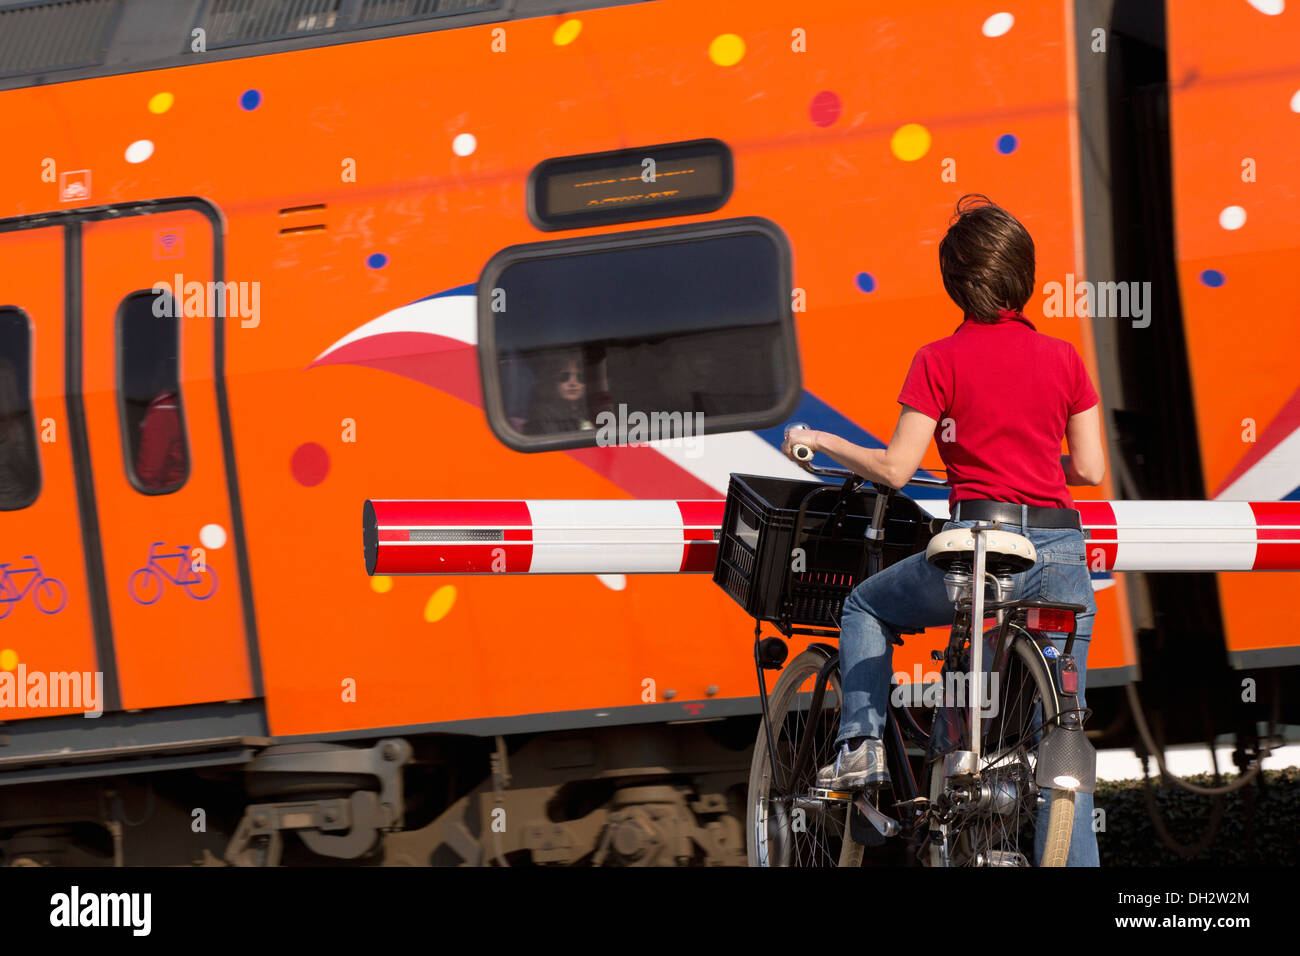 Netherlands, Vogelenzang, Train level crossing. Woman on bicycle waiting for barrier. Orange Royal Kings train passing by. Stock Photo